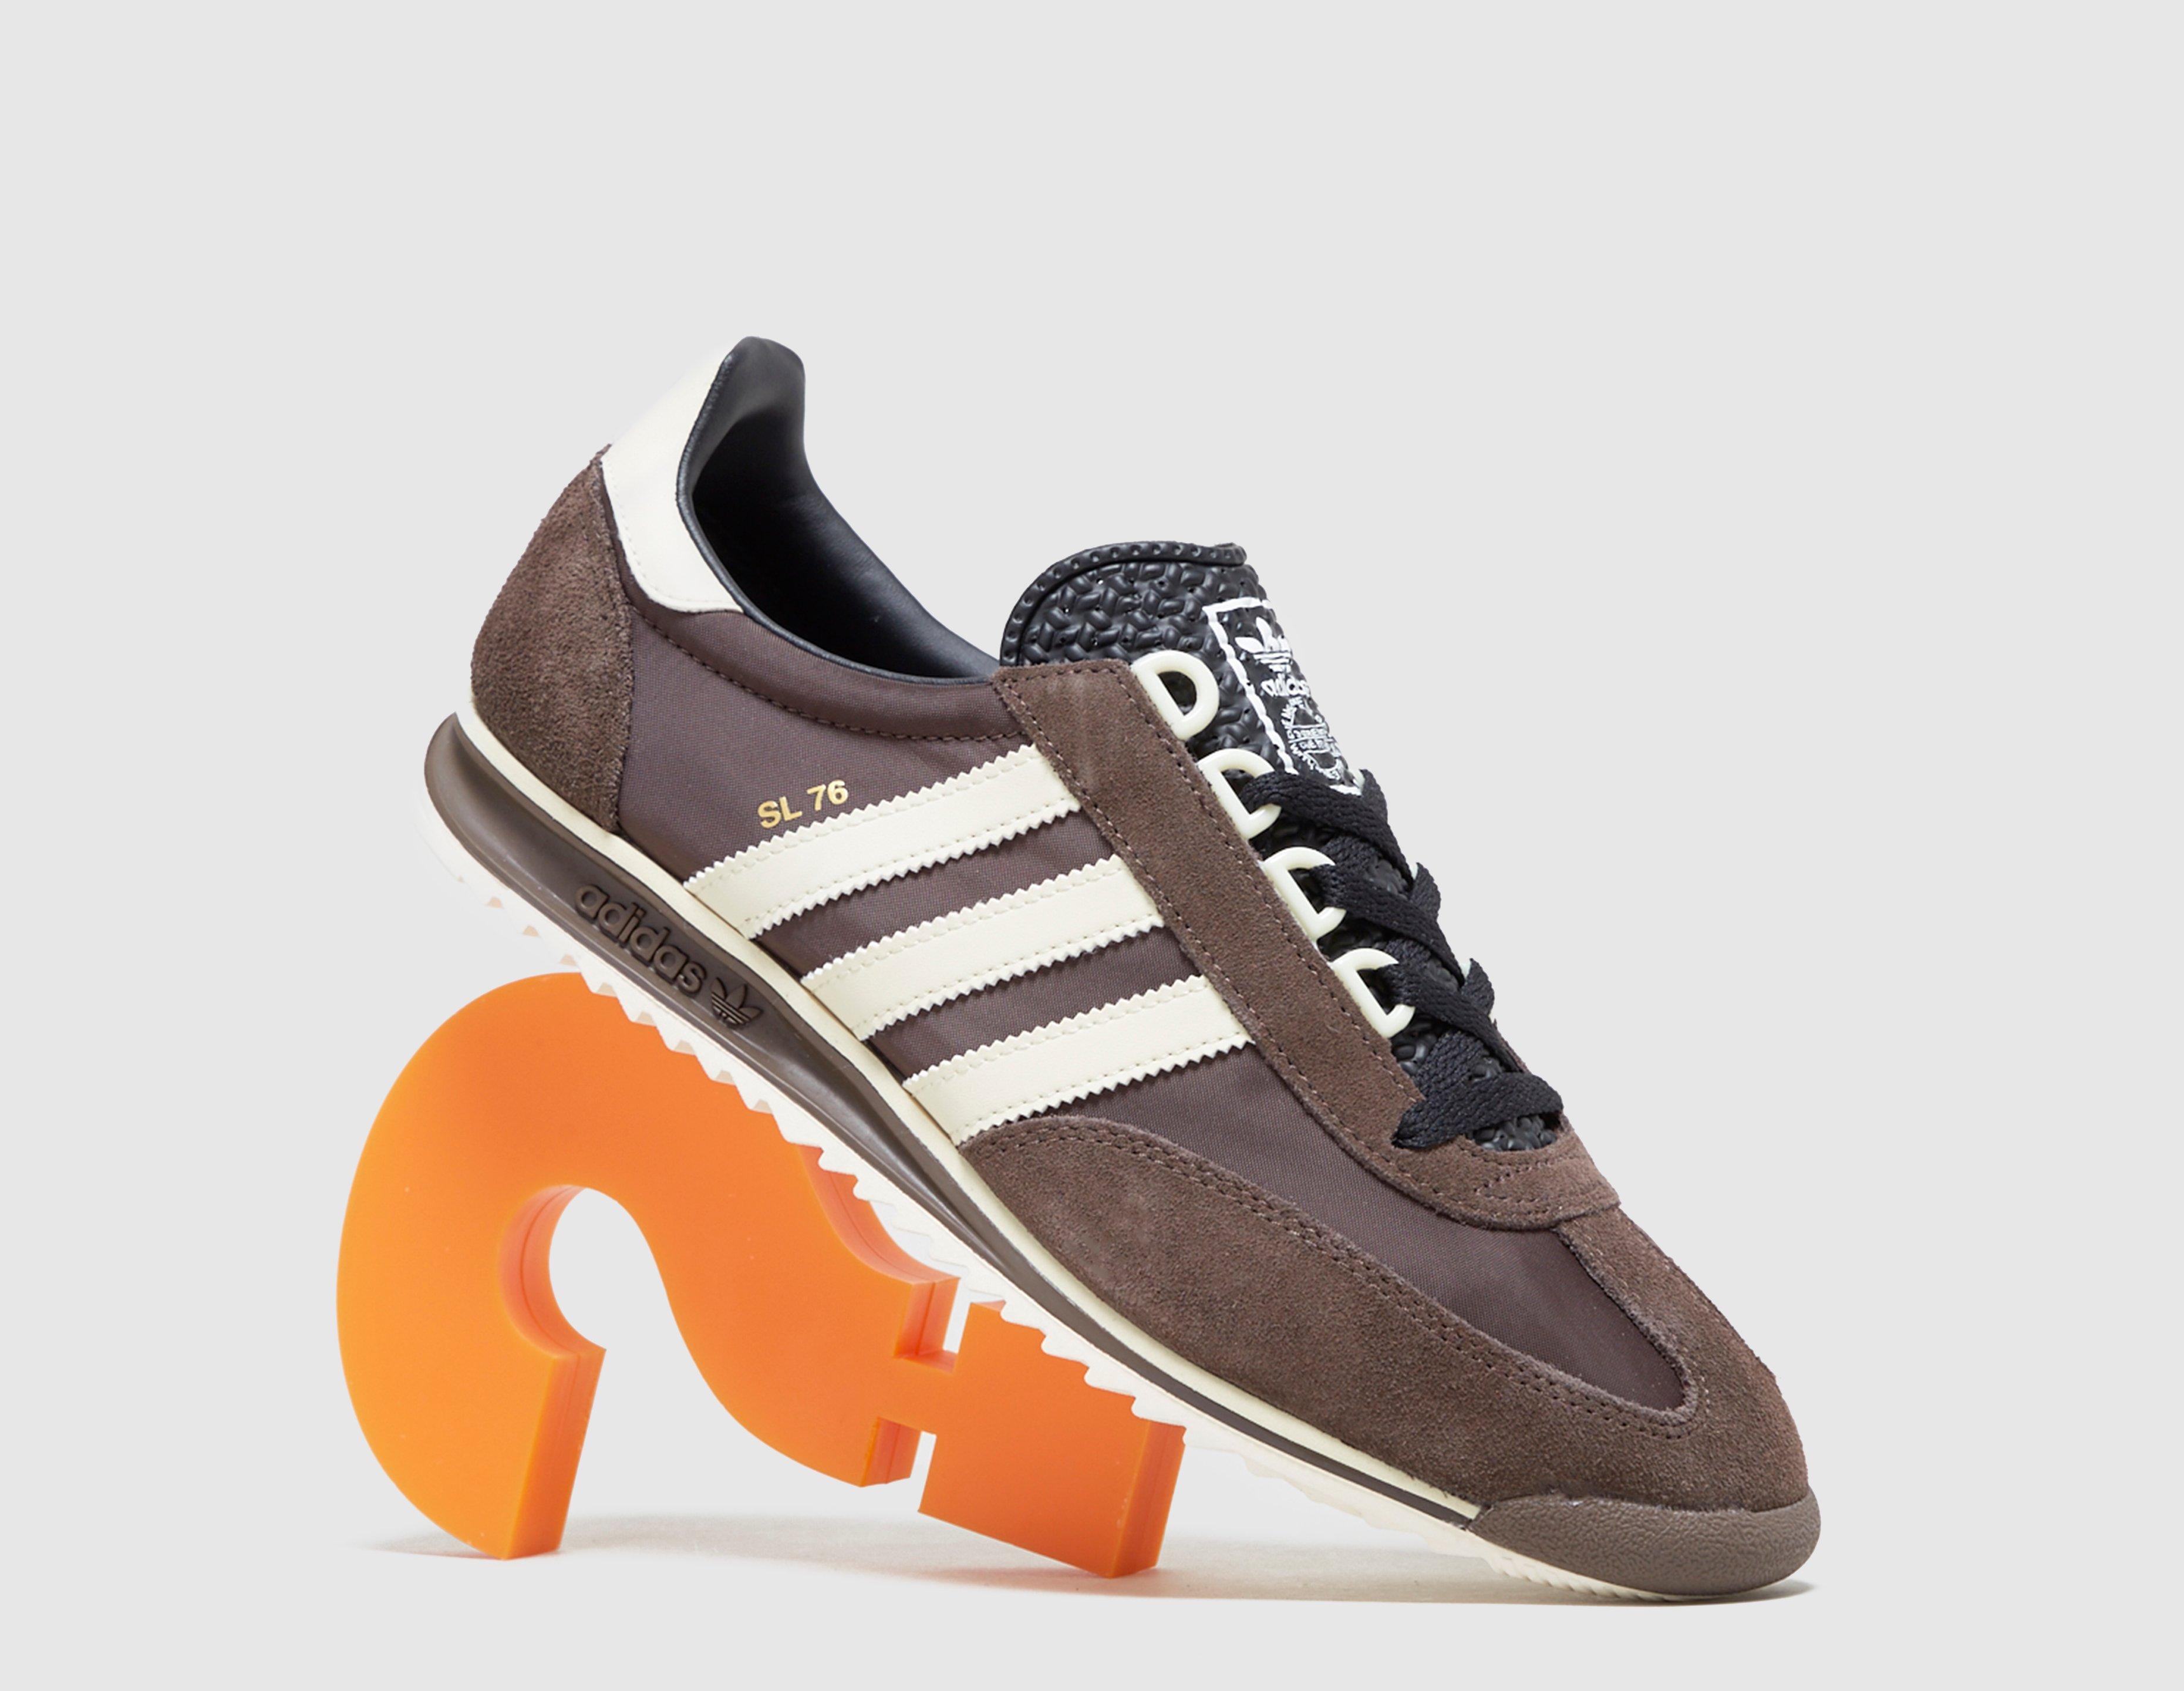 Gracias Embotellamiento damnificados size? a Twitter: "The adidas Originals SL 76 - size? Exclusive. Available  online: https://t.co/FLo5UzQq1y - #adidasoriginals #sl76 #sizeexclusive  https://t.co/mqeFXNlowN" / Twitter